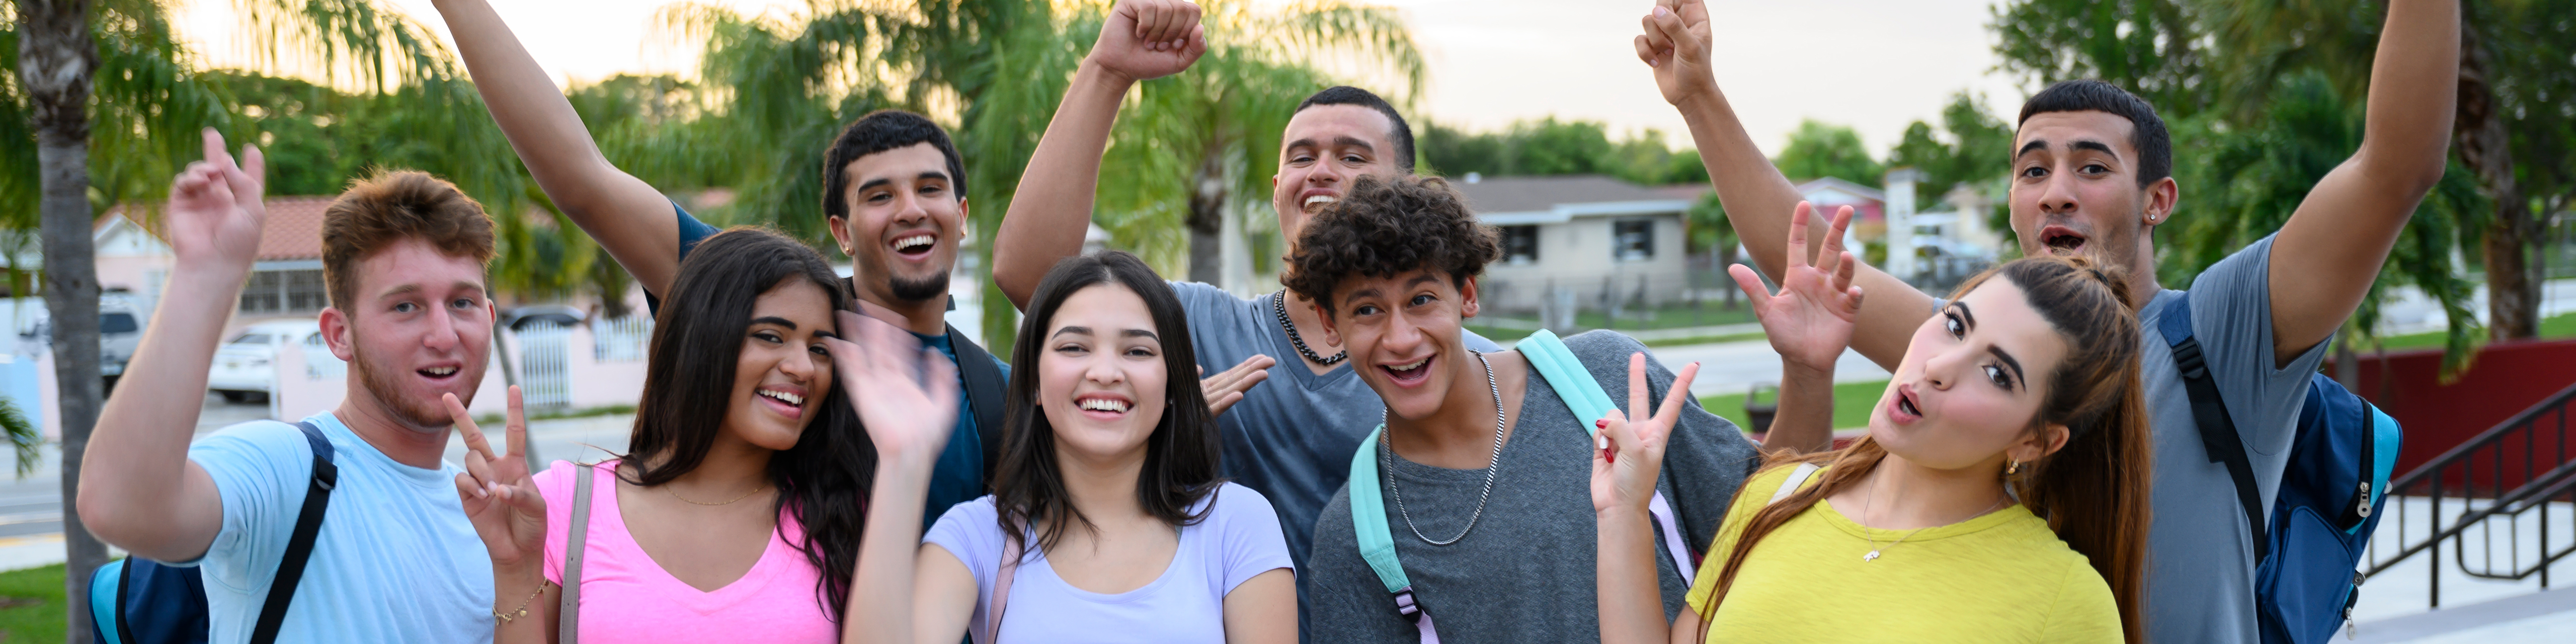 Playful group close-up of Hispanic teenagers laughing and gesturing as they look at camera outside their high school.